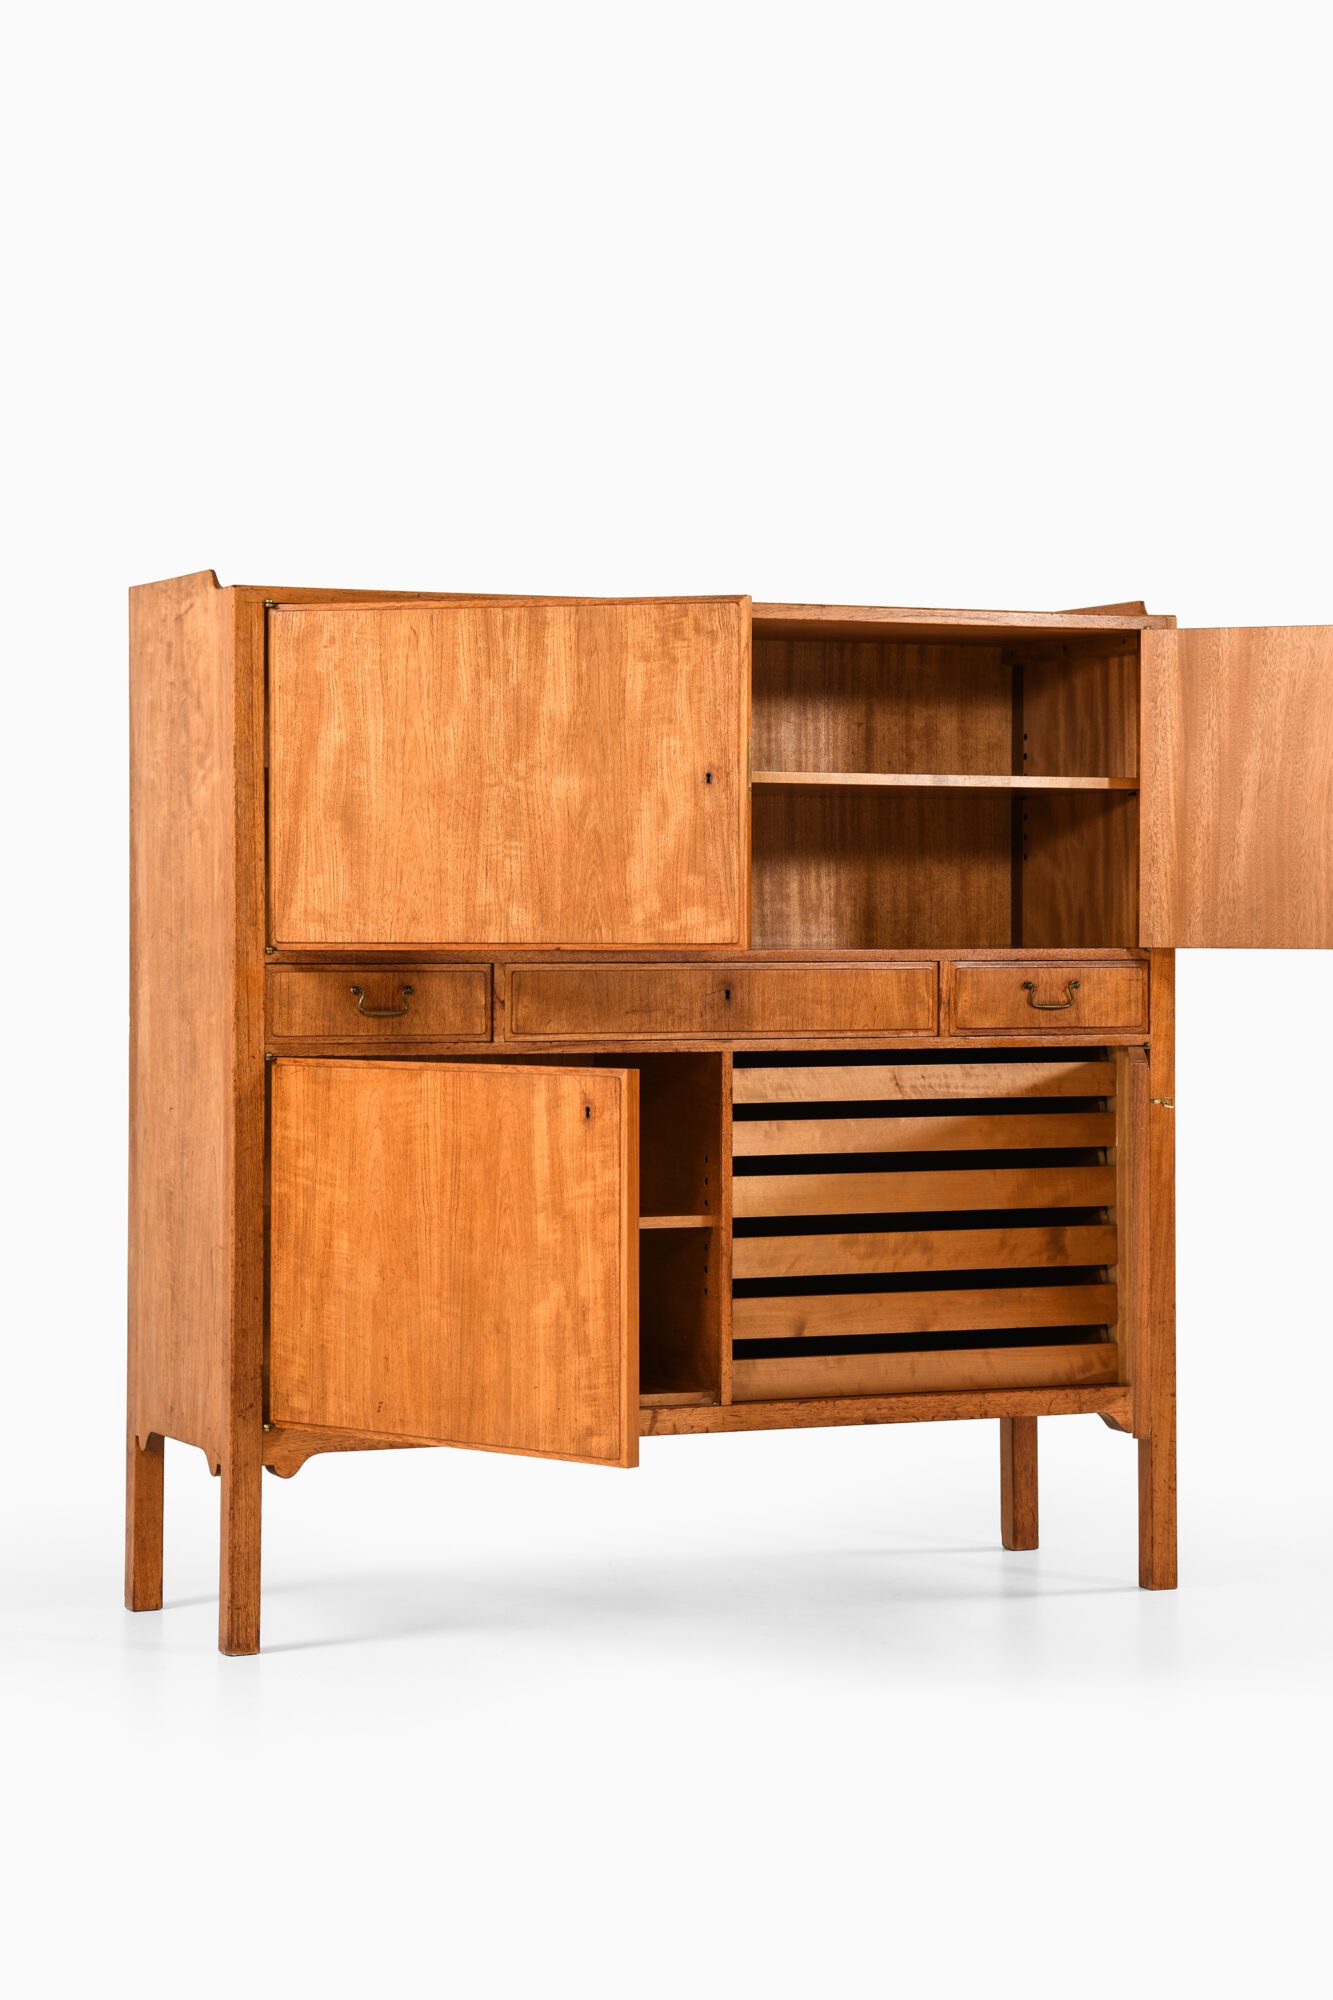 Axel Bäck cabinet in mahogany and brass at Studio Schalling